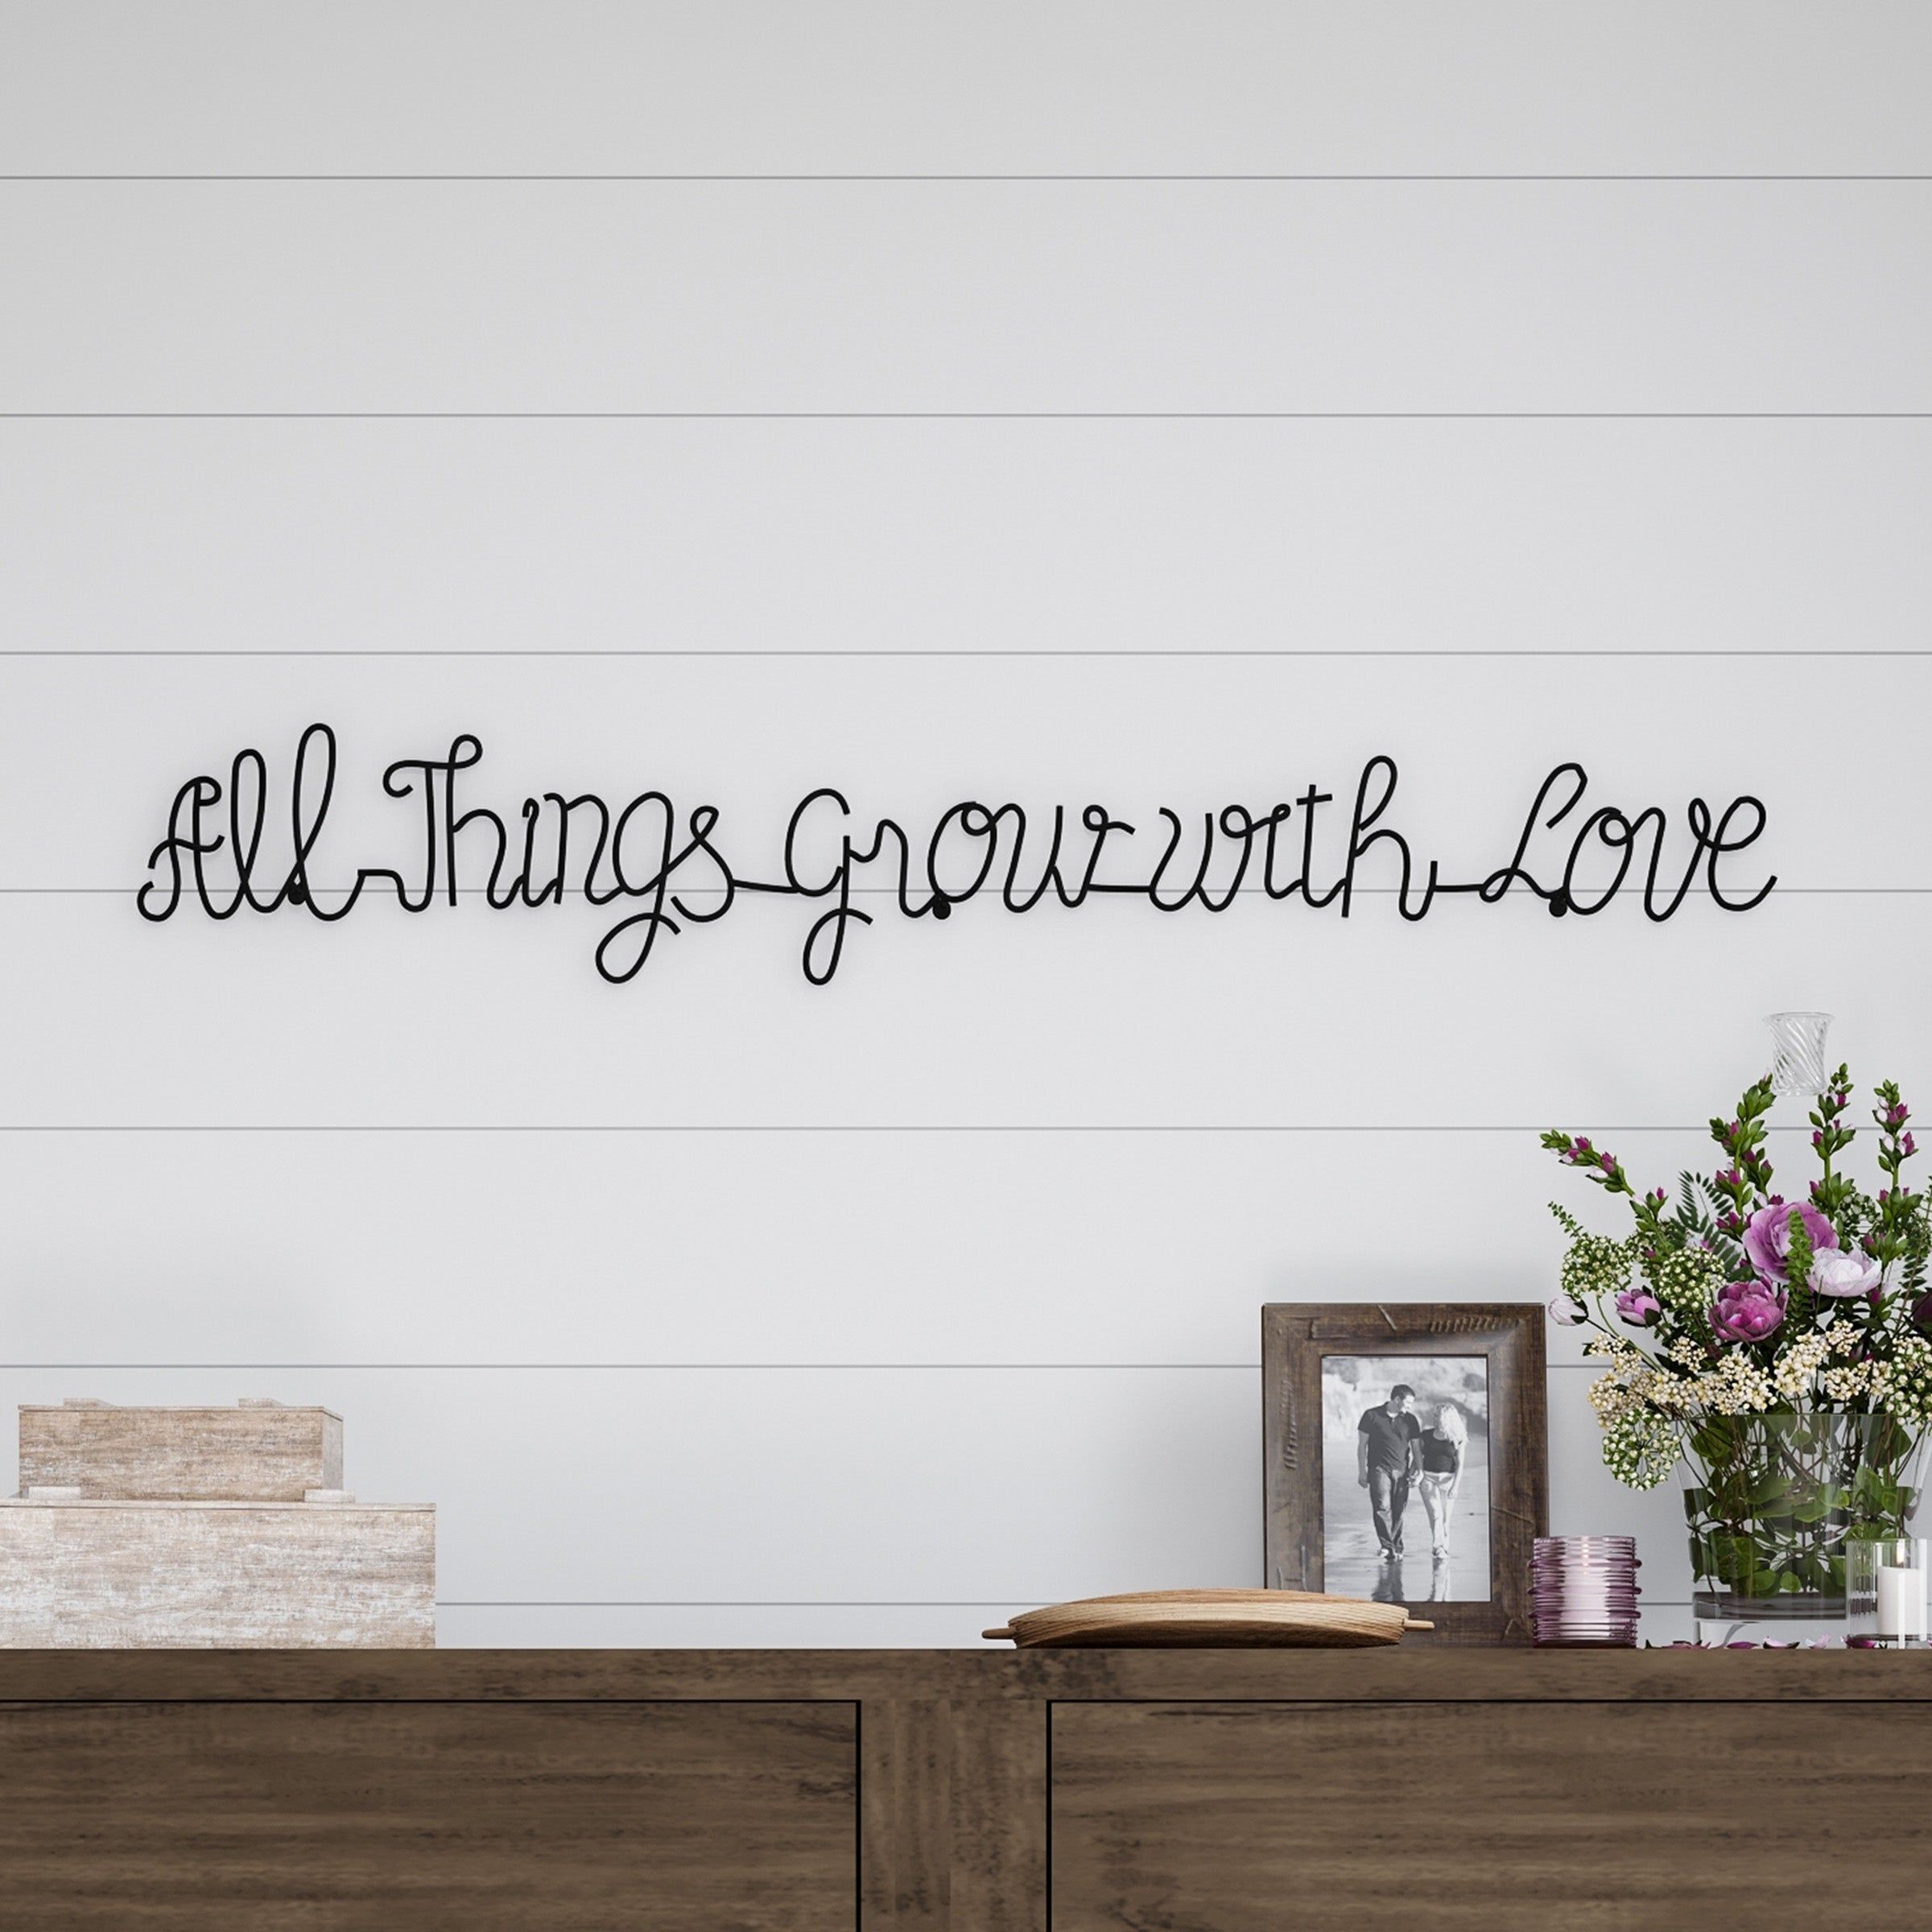 Quotes And Sayings Metal Art | Find Great Art Gallery Deals Within Farm Metal Wall Rack And 3 Tin Pot With Hanger Wall Decor (View 27 of 30)